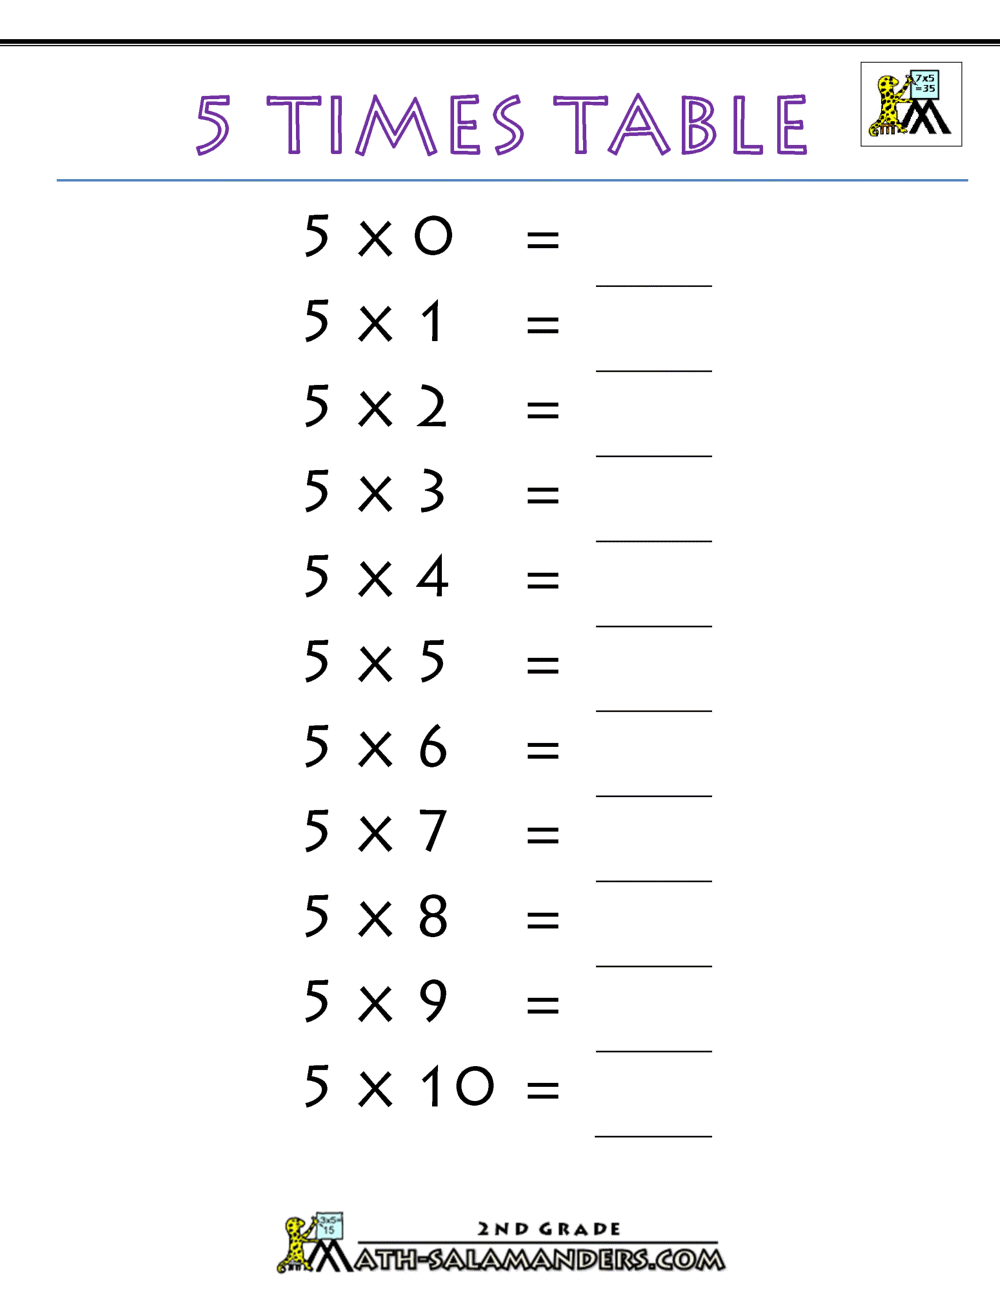 5 Times Table Sheet